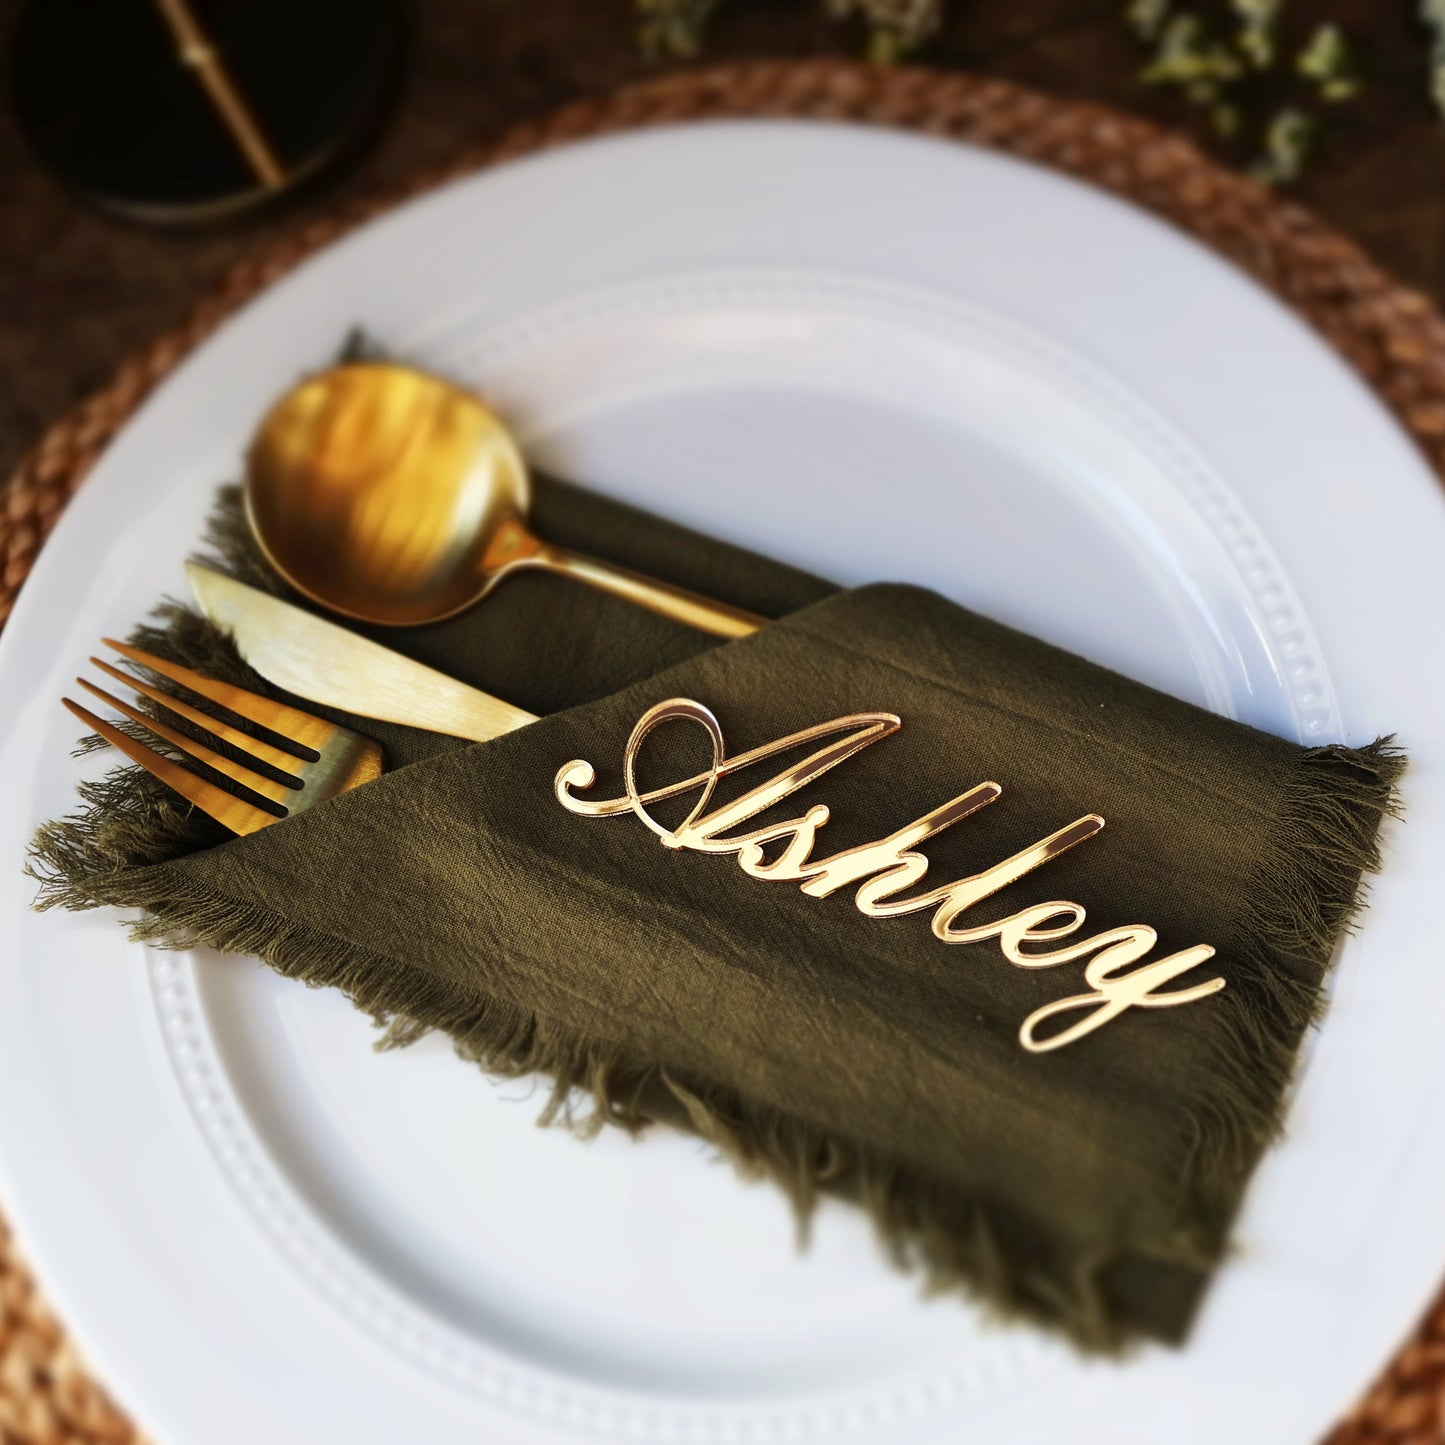 of Place cards name tags